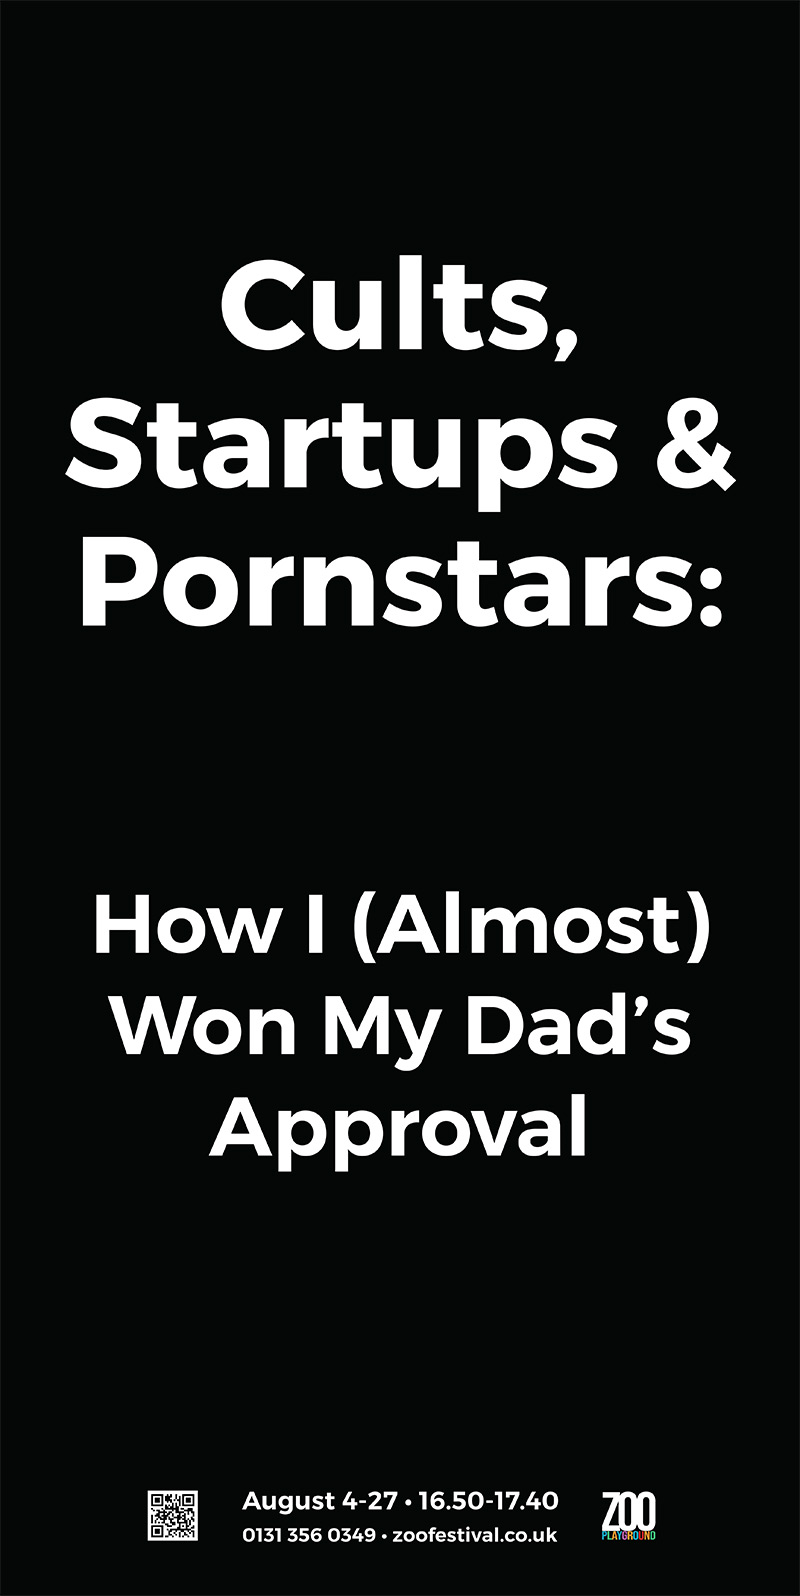 The poster for Cults, Startups and Pornstars: How I (Almost) Won My Dad's Approval